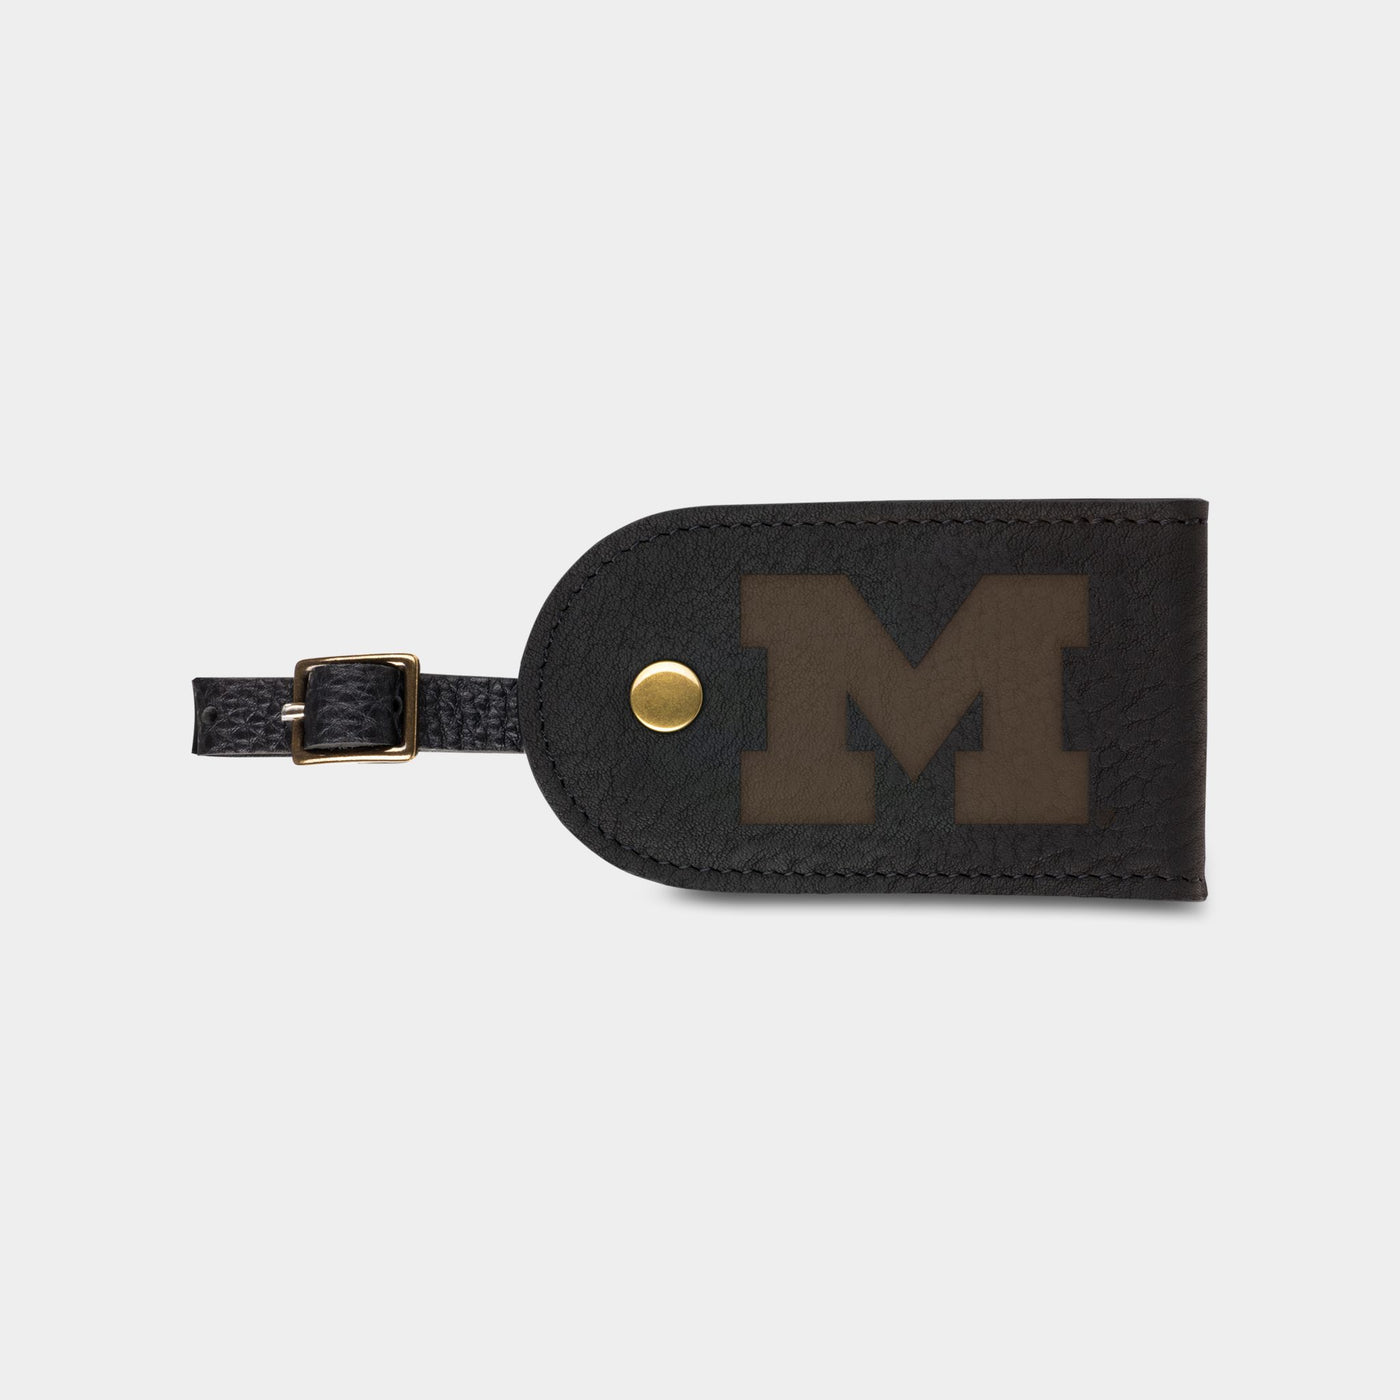 Michigan Wolverines "M" Leather Luggage Tag